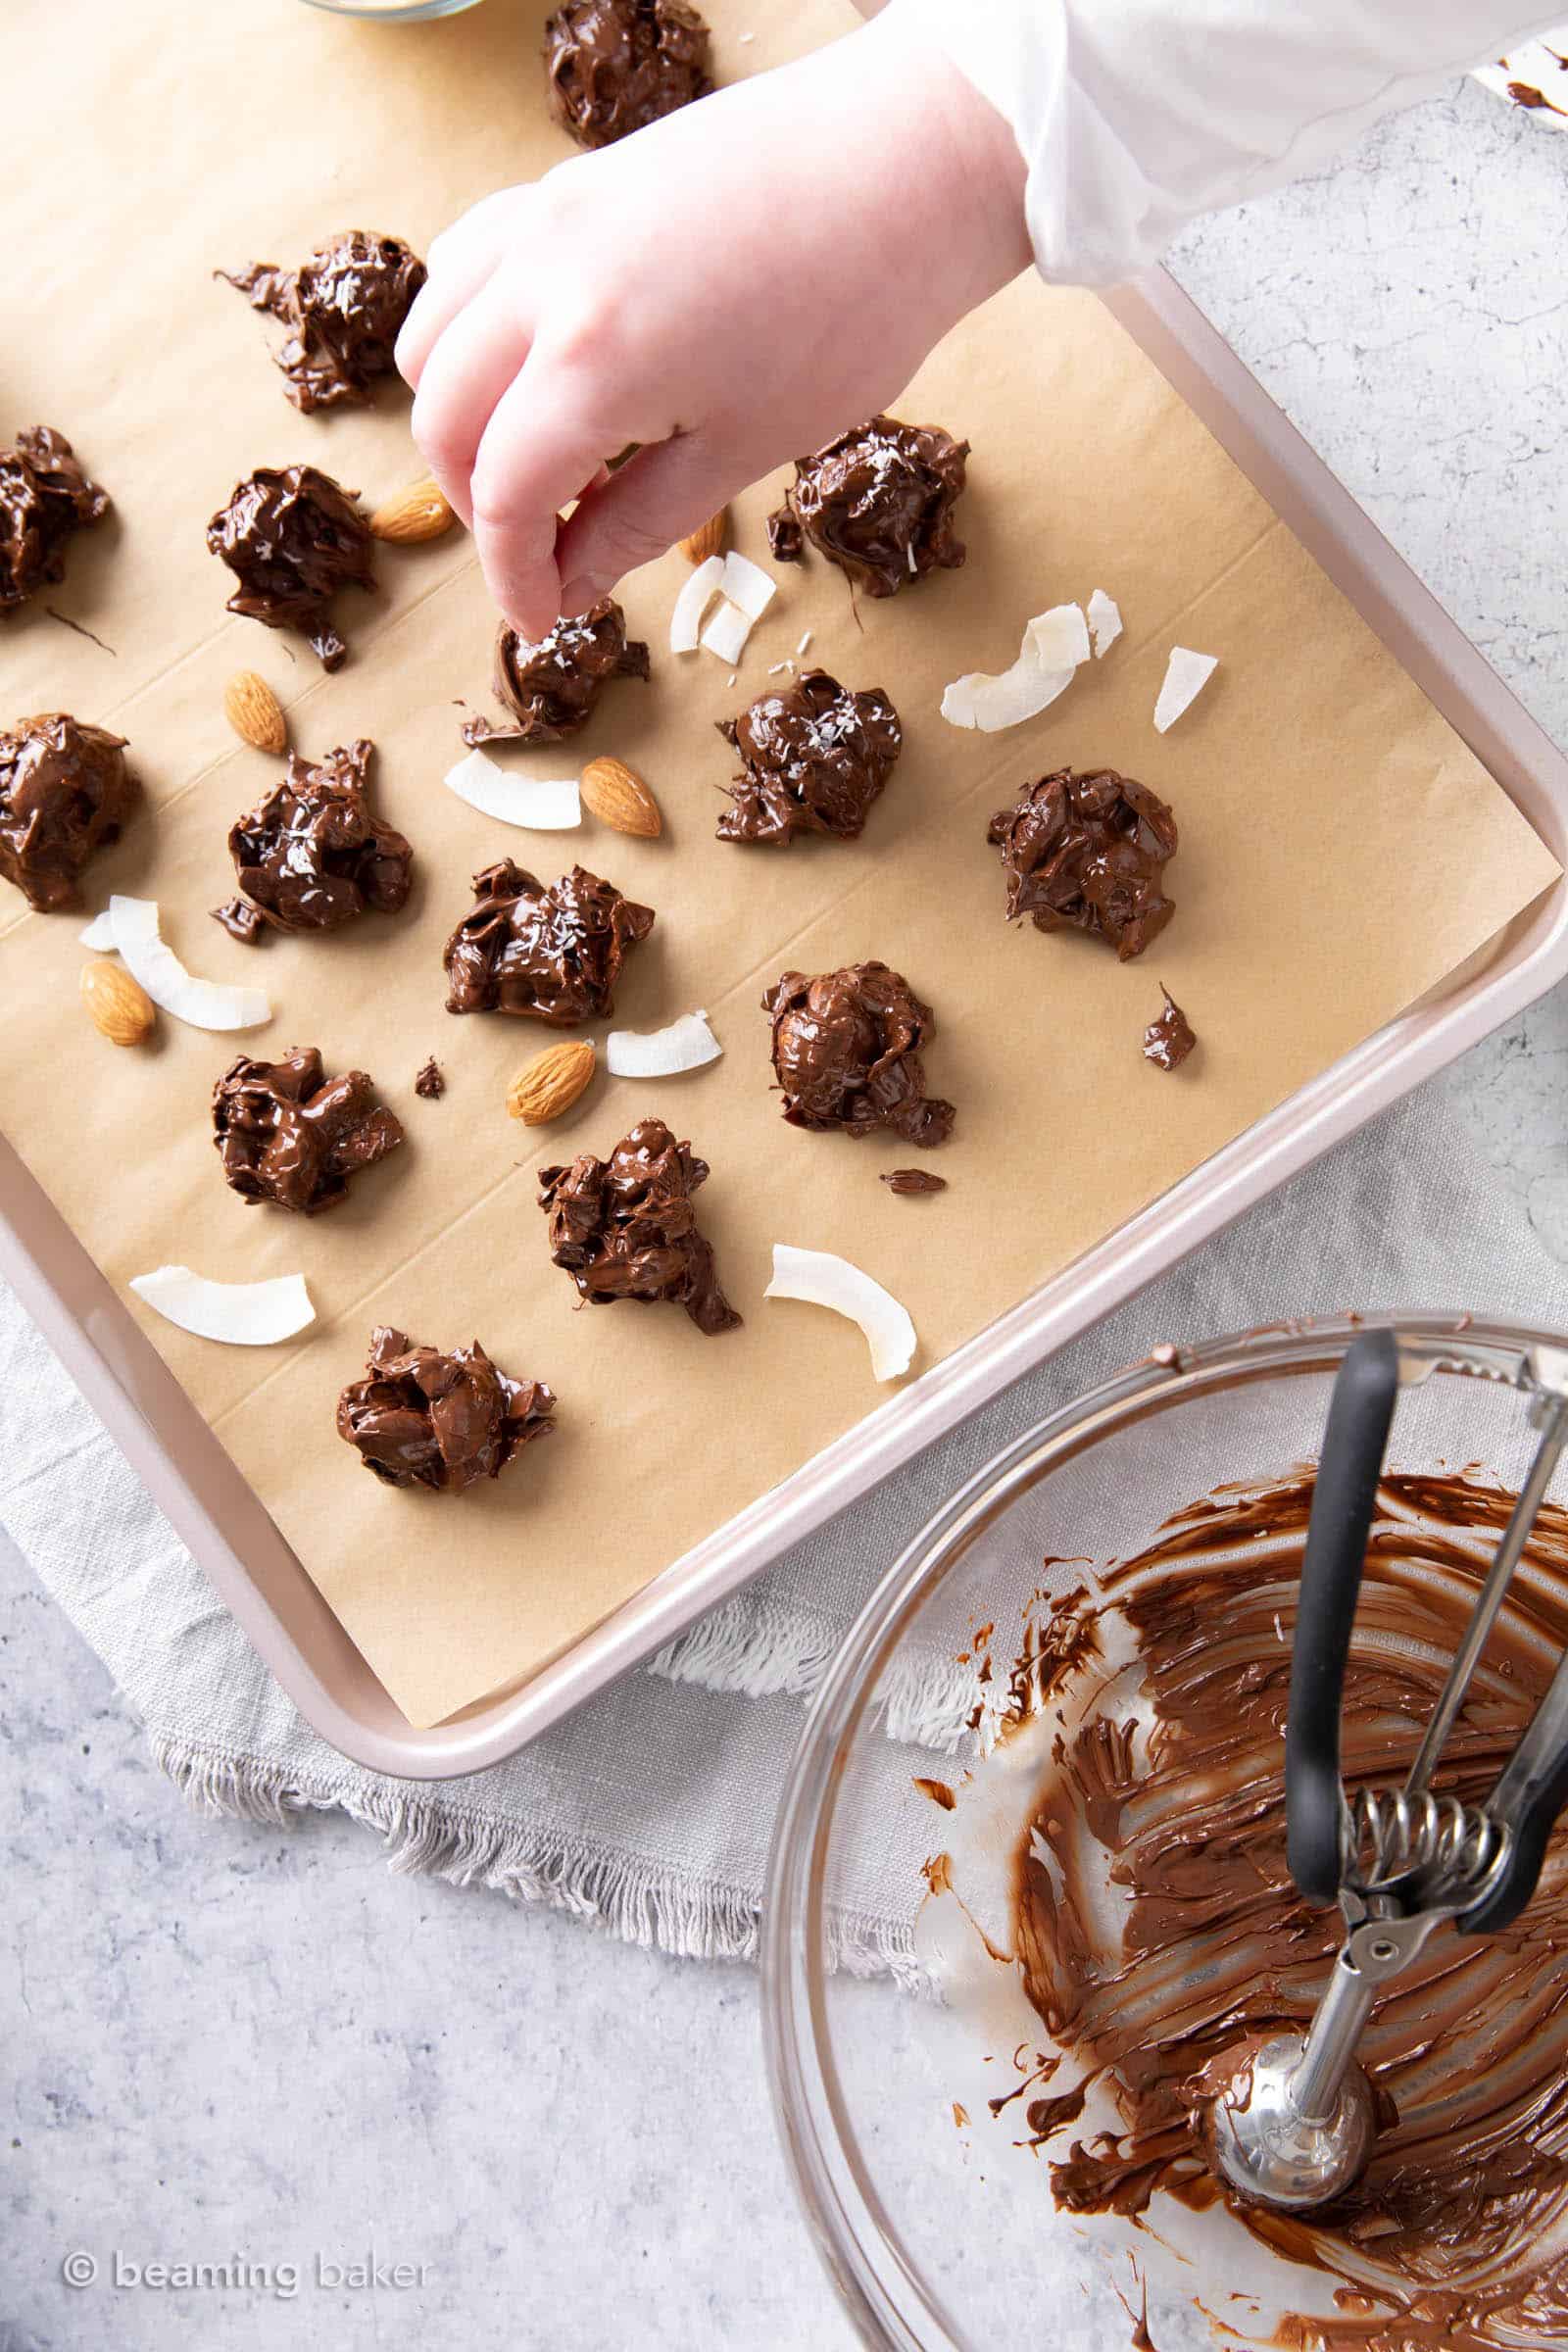 A hand sprinkling chopped almonds and shredded coconut onto melted dark chocolate almond coconut clusters with a bowl of melted chocolate nearby